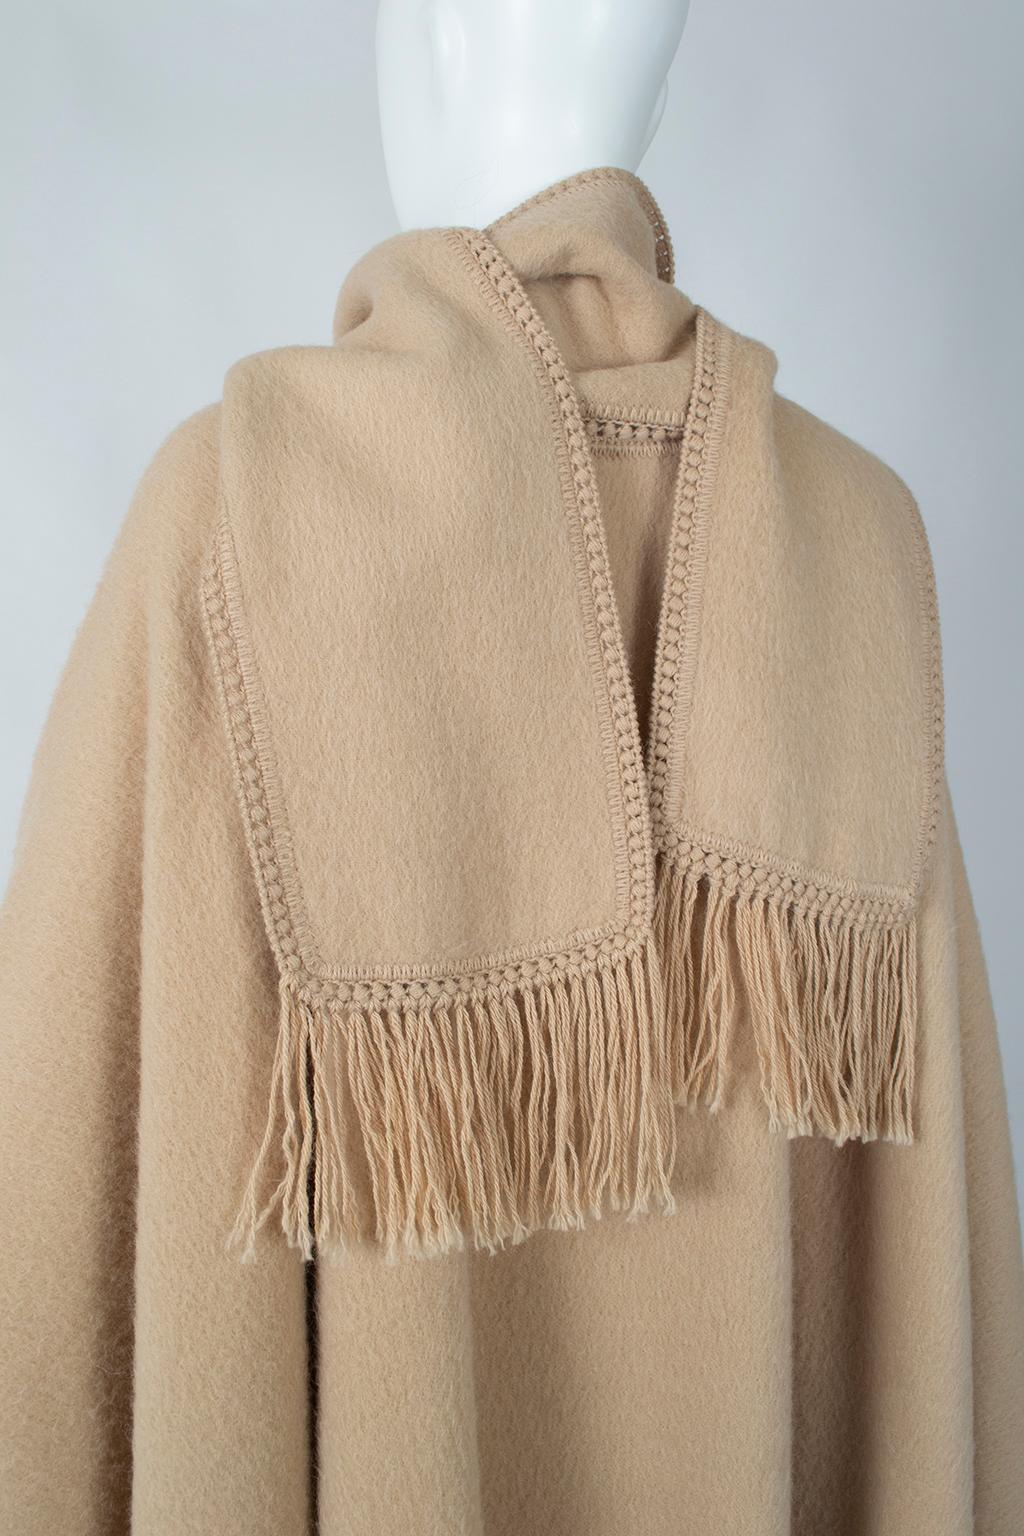 Camel Peruvian Alpaca Poncho with Attached Scarf, Jacome Estate - One Size, 1960 3